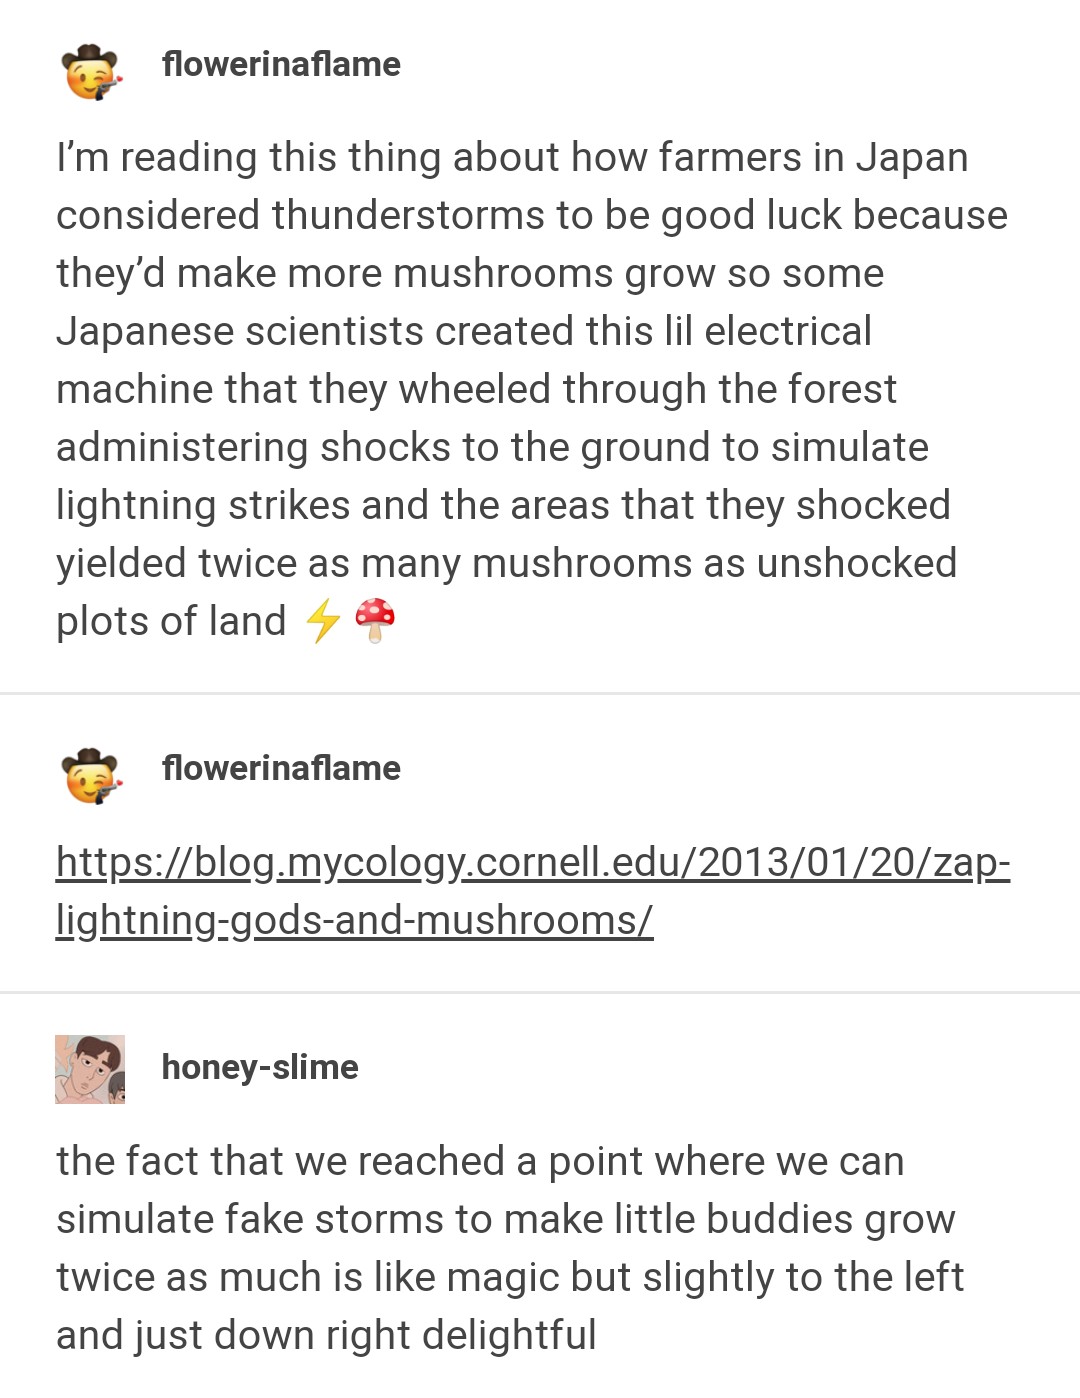 document - flowerinaflame I'm reading this thing about how farmers in Japan considered thunderstorms to be good luck because they'd make more mushrooms grow so some Japanese scientists created this lil electrical machine that they wheeled through the fore